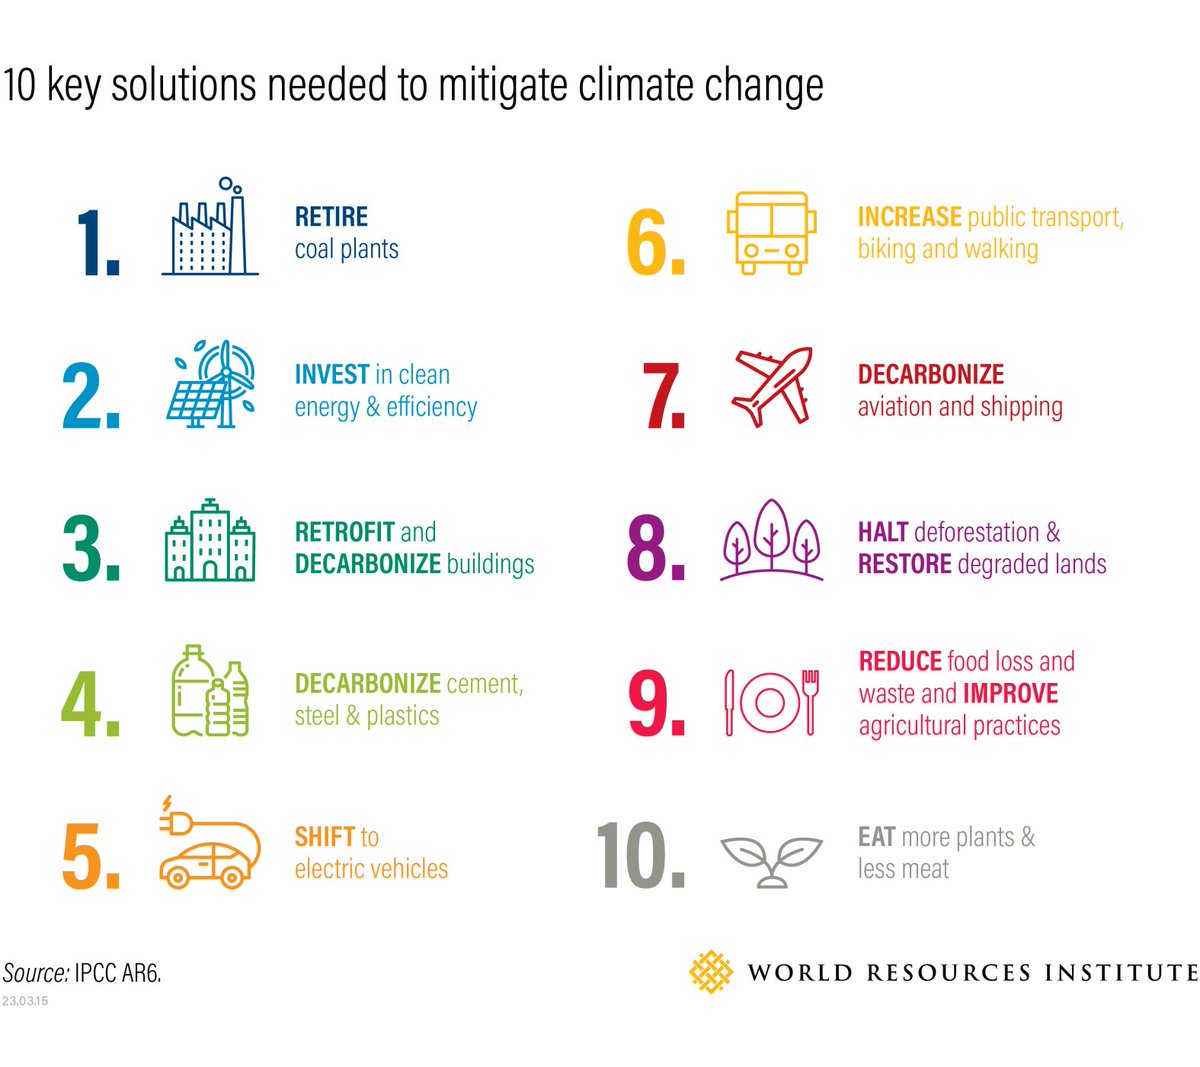 The IPCC AR6 report mentions what we can do to mitigate #ClimateChange #ClimateAction #GreeningOurFuture